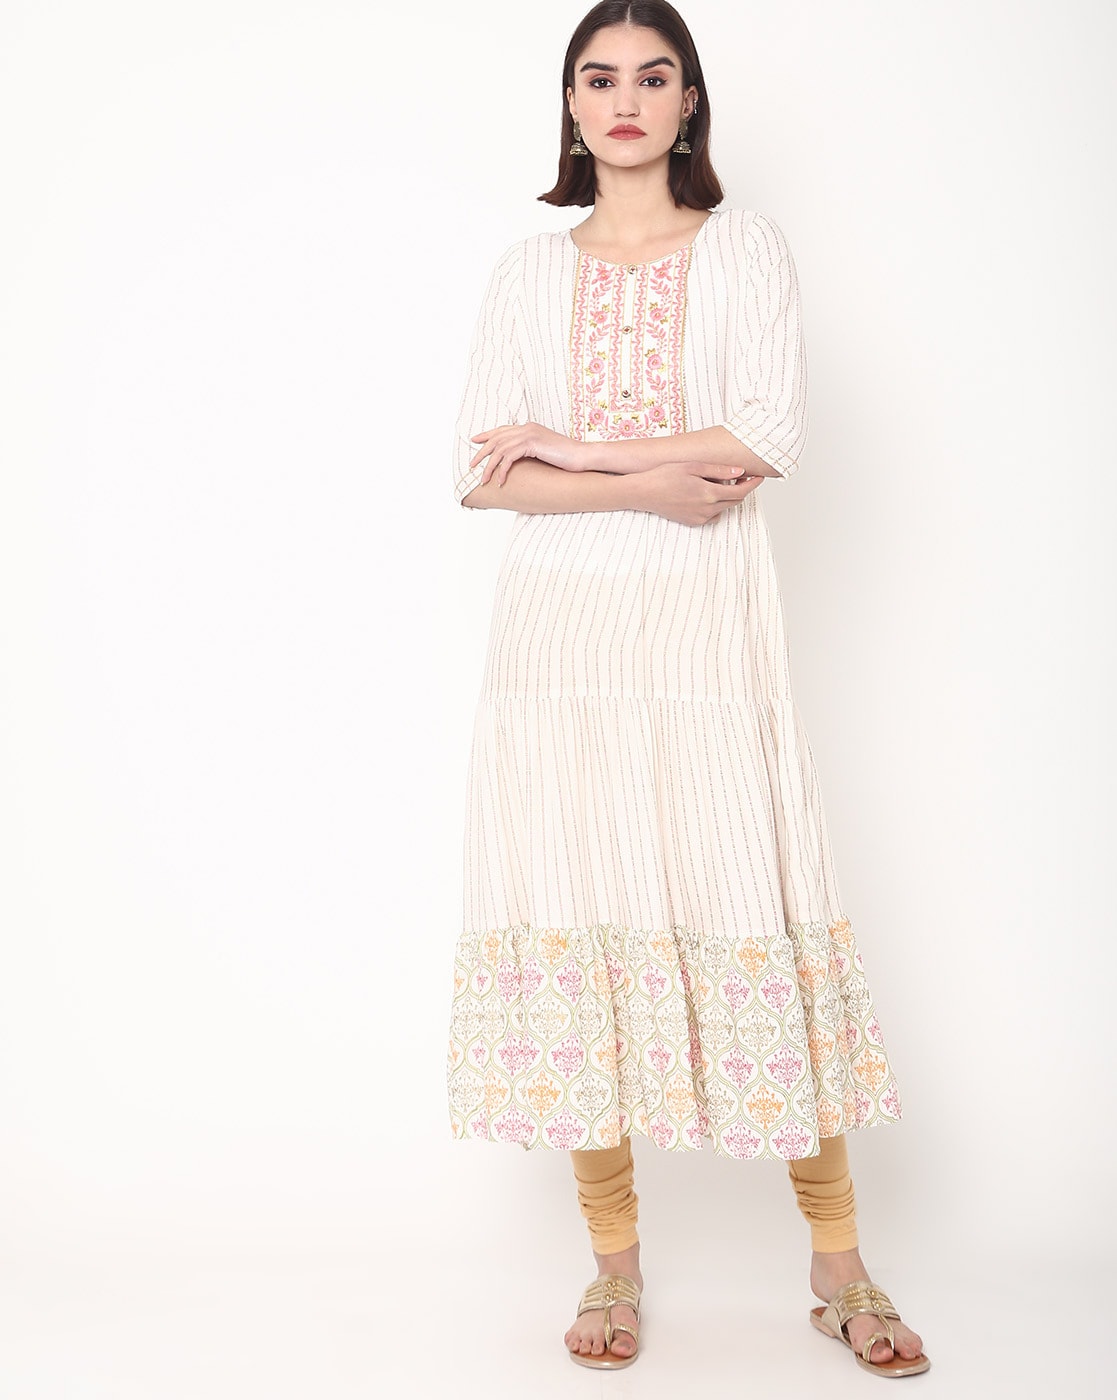 Details more than 83 white kurti in reliance trends best - thtantai2